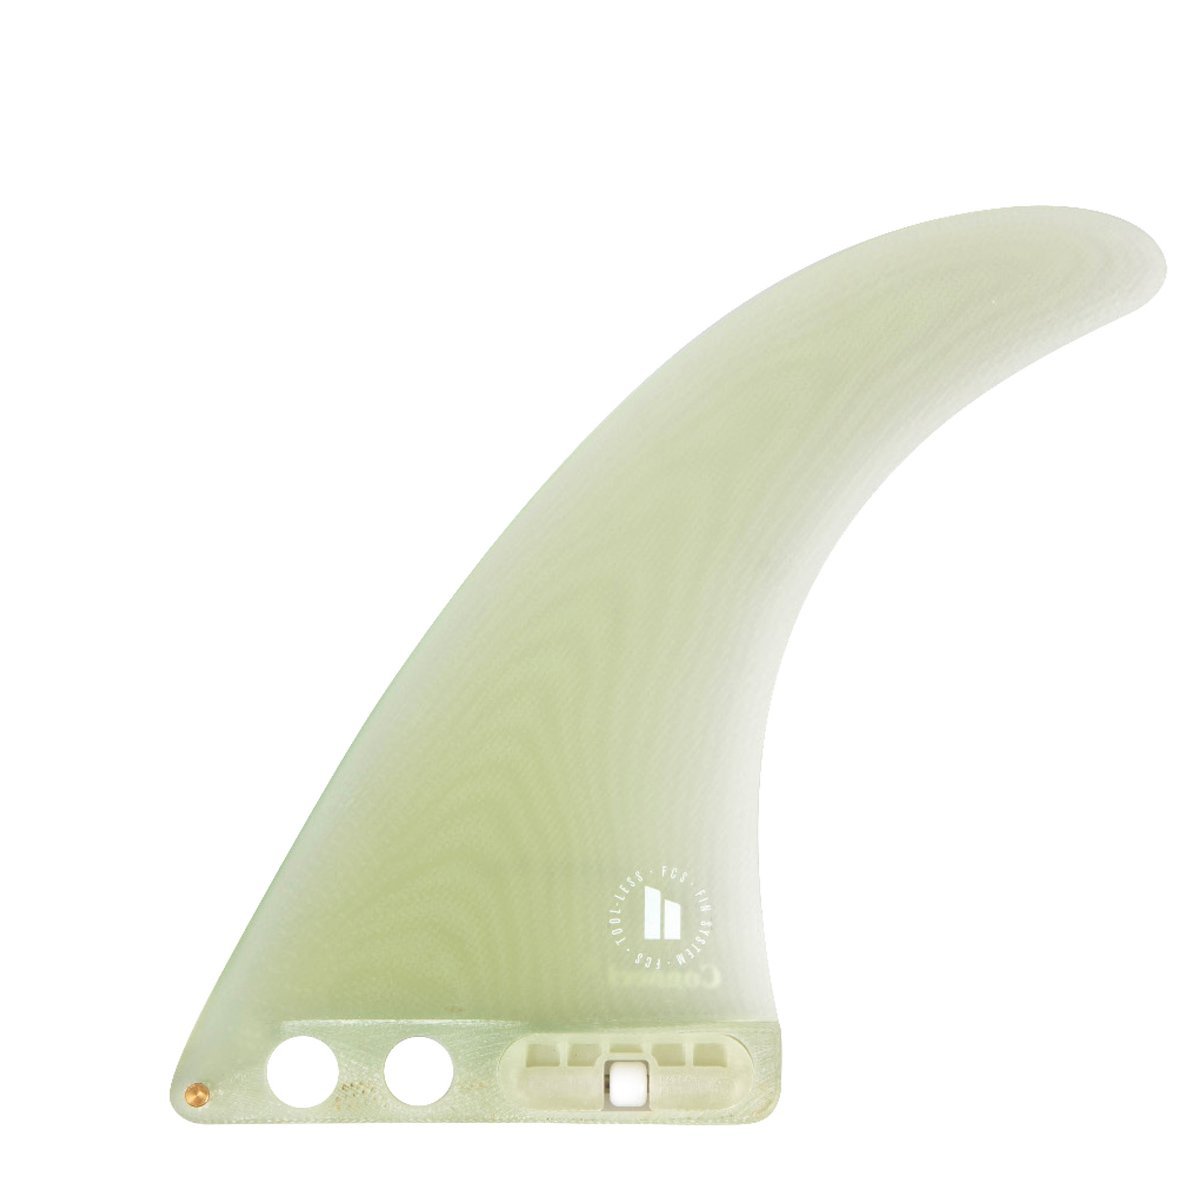 FCS2 エフシーエスツー ロングボード センターフィン 8.0" CONNECT PG LONGBOARD FIN コネクト シングルフィン Black / Clear 2カラー